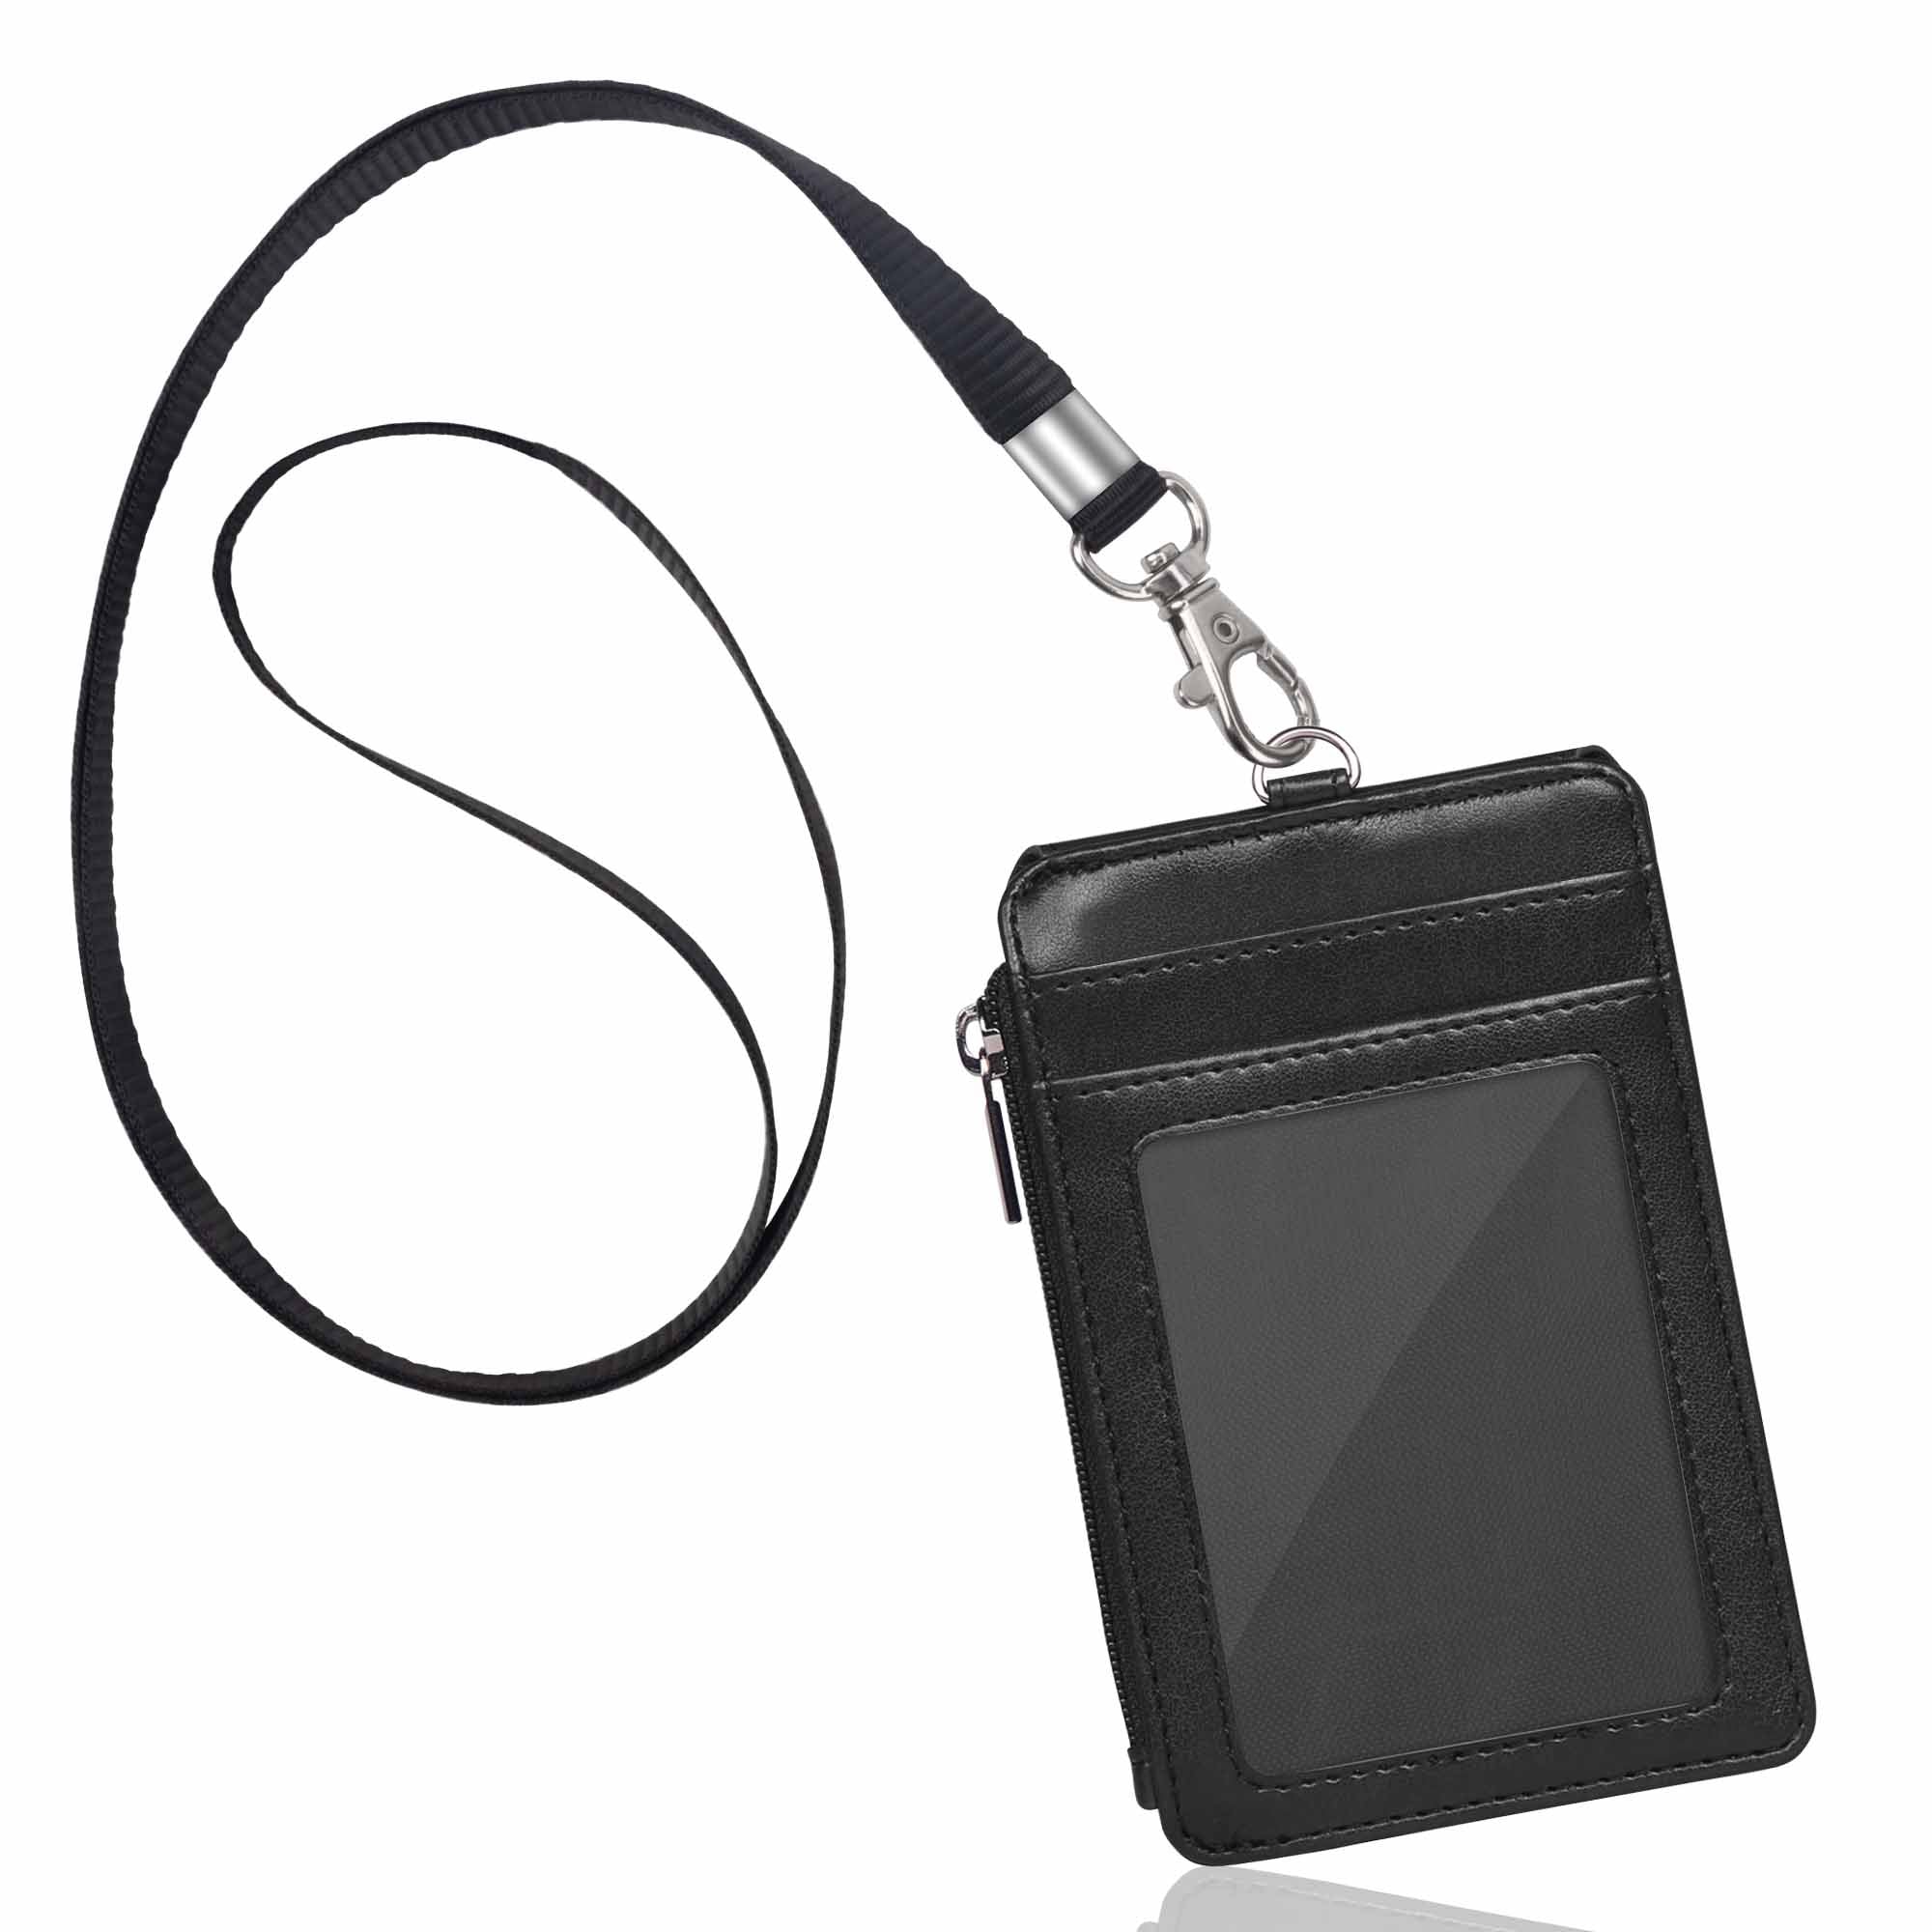 Badge Holder with Zipper, Arae PU Leather ID Badge Card Holder Wallet with  [2 ID Window] Cash Pockets Credit Card Slots and Detachable Lanyard/Strap